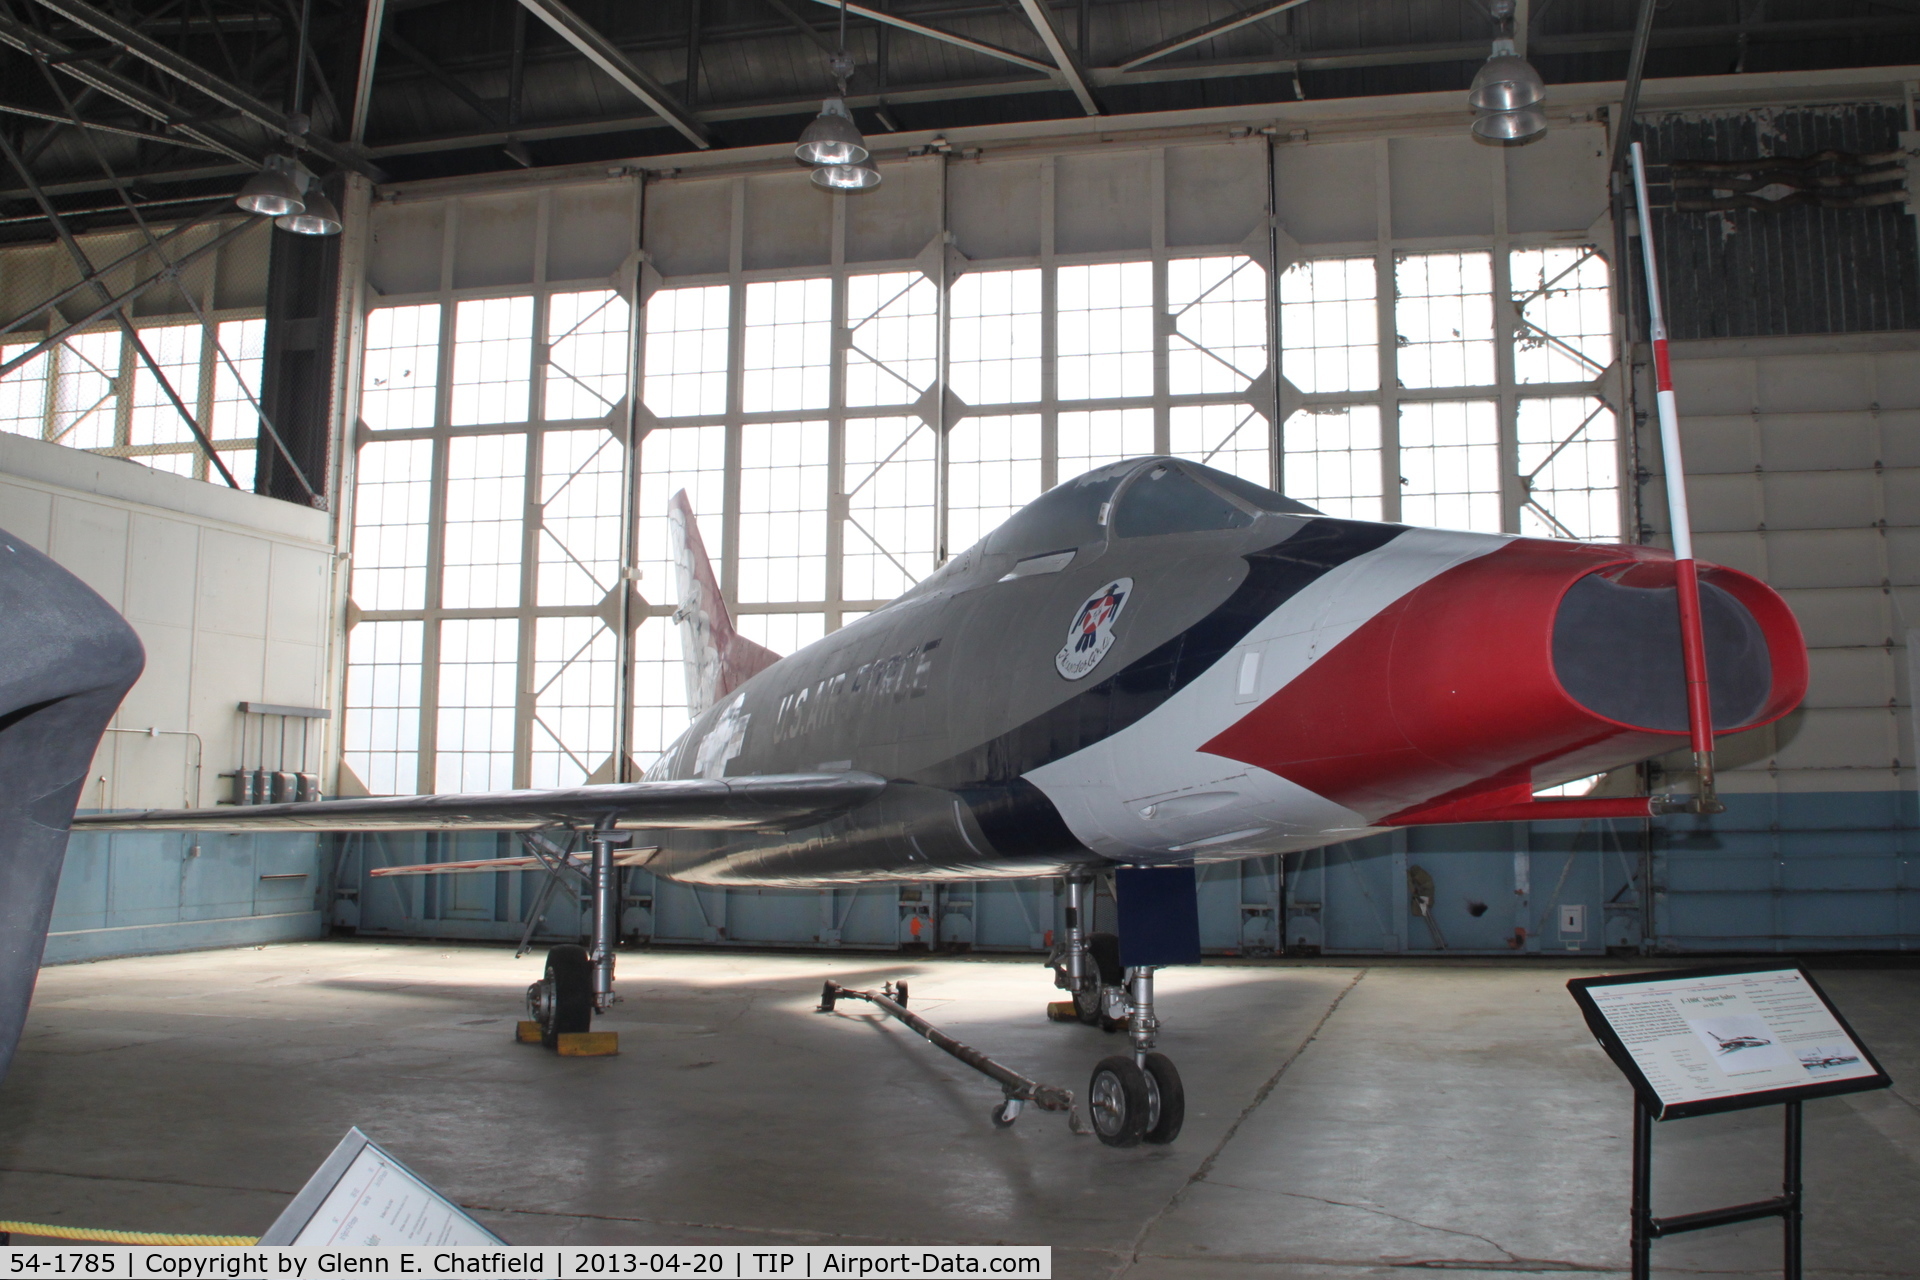 54-1785, 1955 North American F-100C Super Sabre C/N 217-46, Chanute Air Museum. This aircraft was never a Thunderbird.